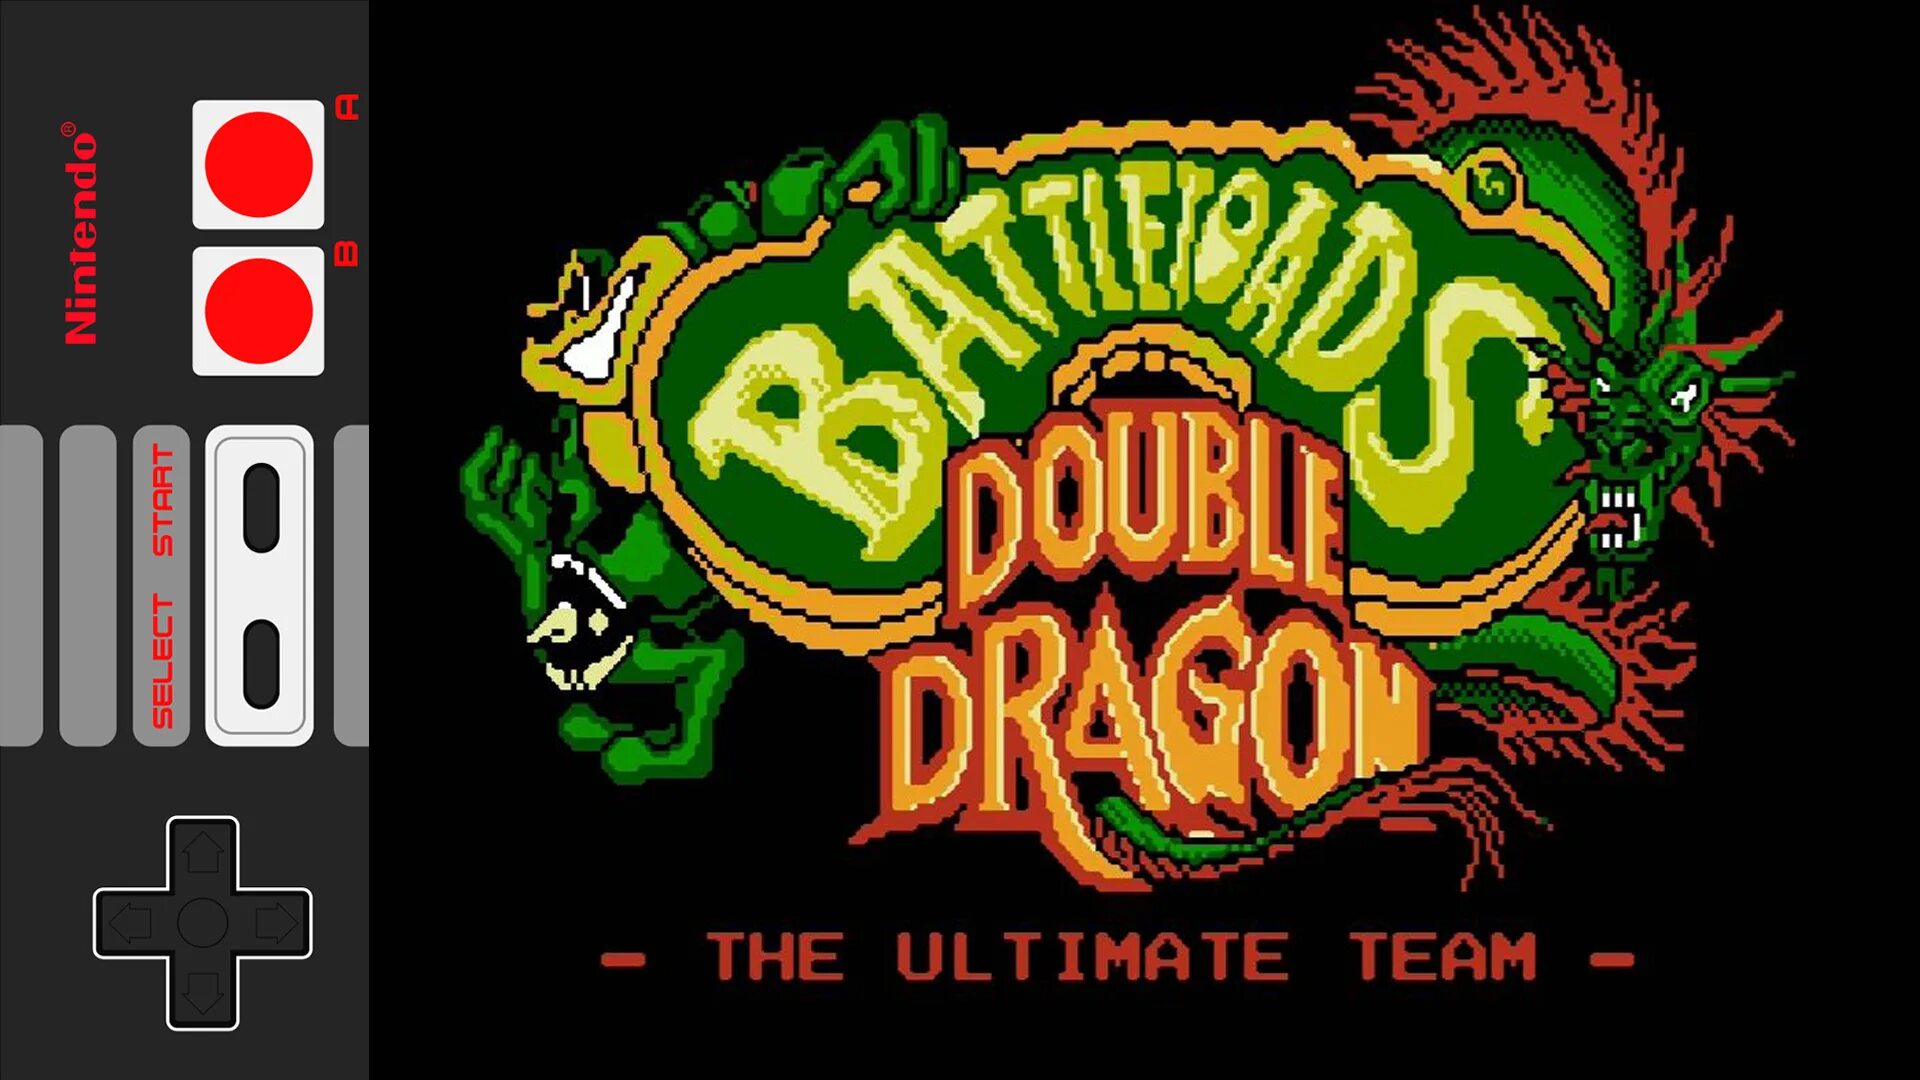 Battletoads Double Dragon the Ultimate Team NES. Battletoads & Double Dragon - the Ultimate Team. Battletoads Double Dragon Денди. Battletoads Double Dragon Sega. Battletoads ultimate team